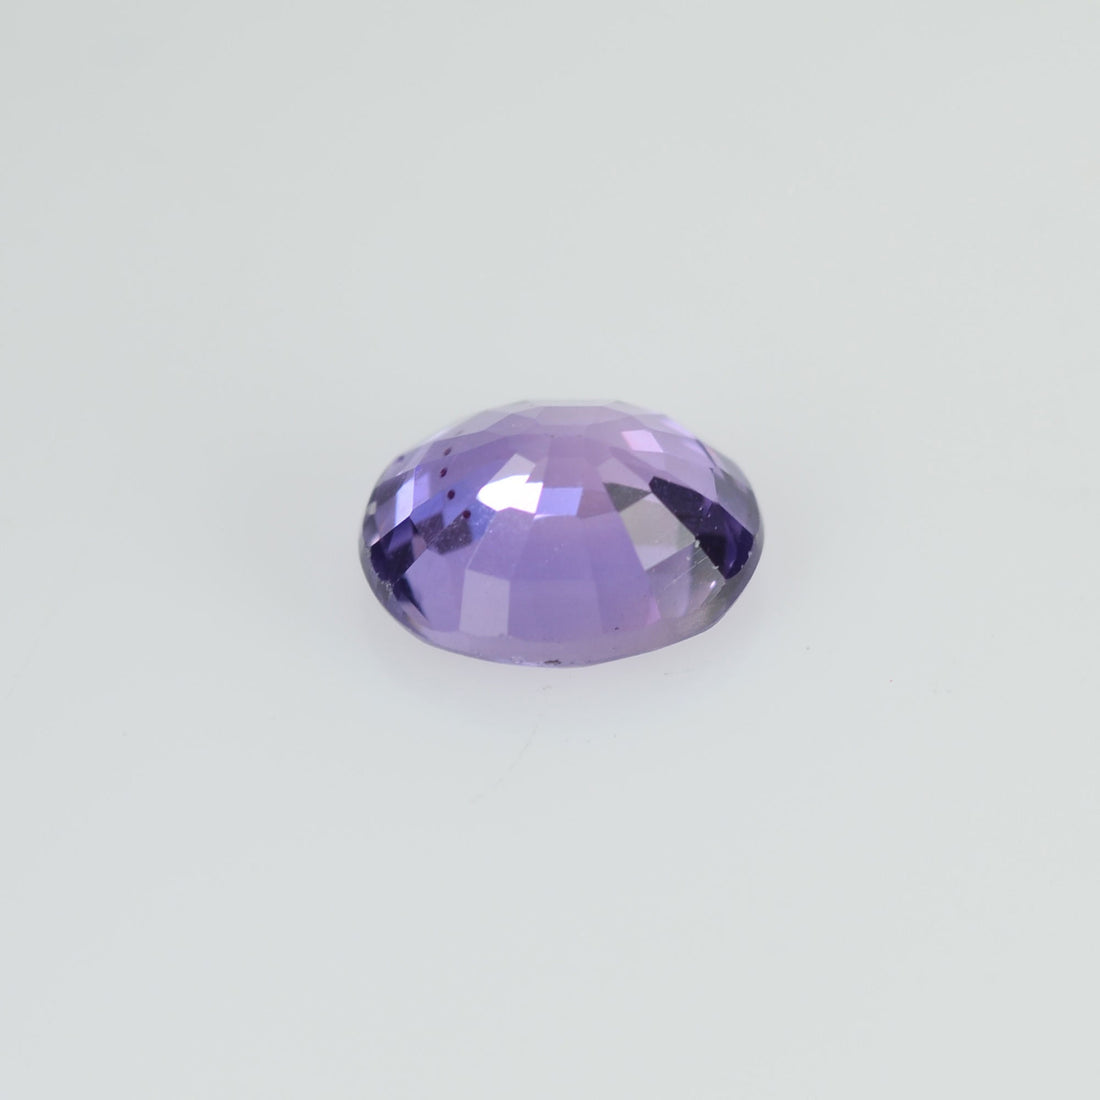 0.46 cts Natural Lavender Sapphire Loose Gemstone Oval Cut